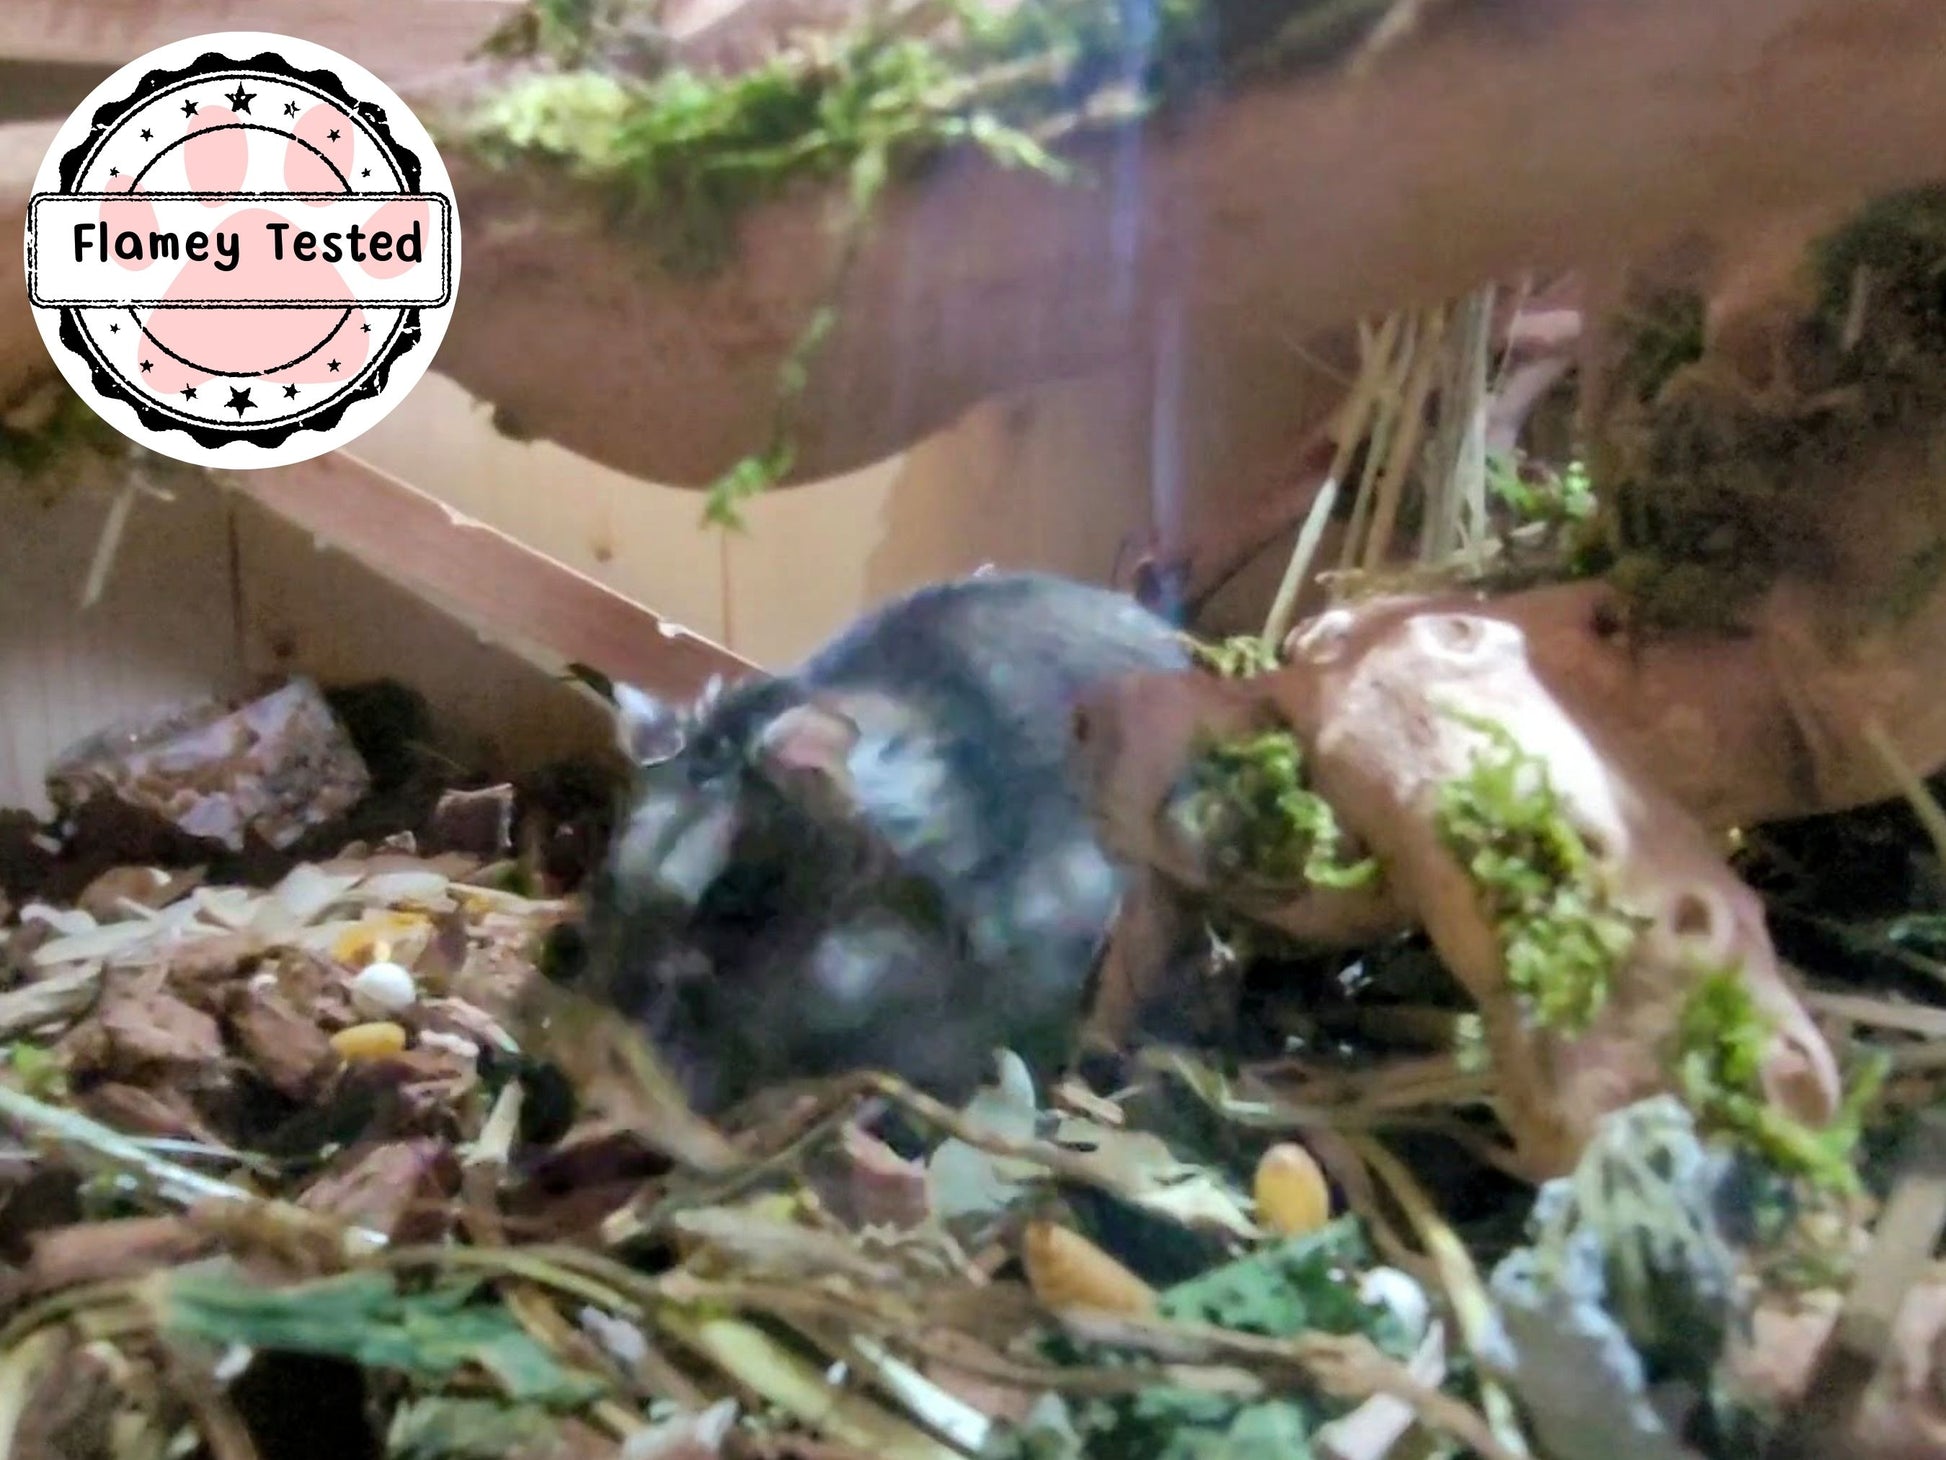 a hamster enjoying some forest floor forage